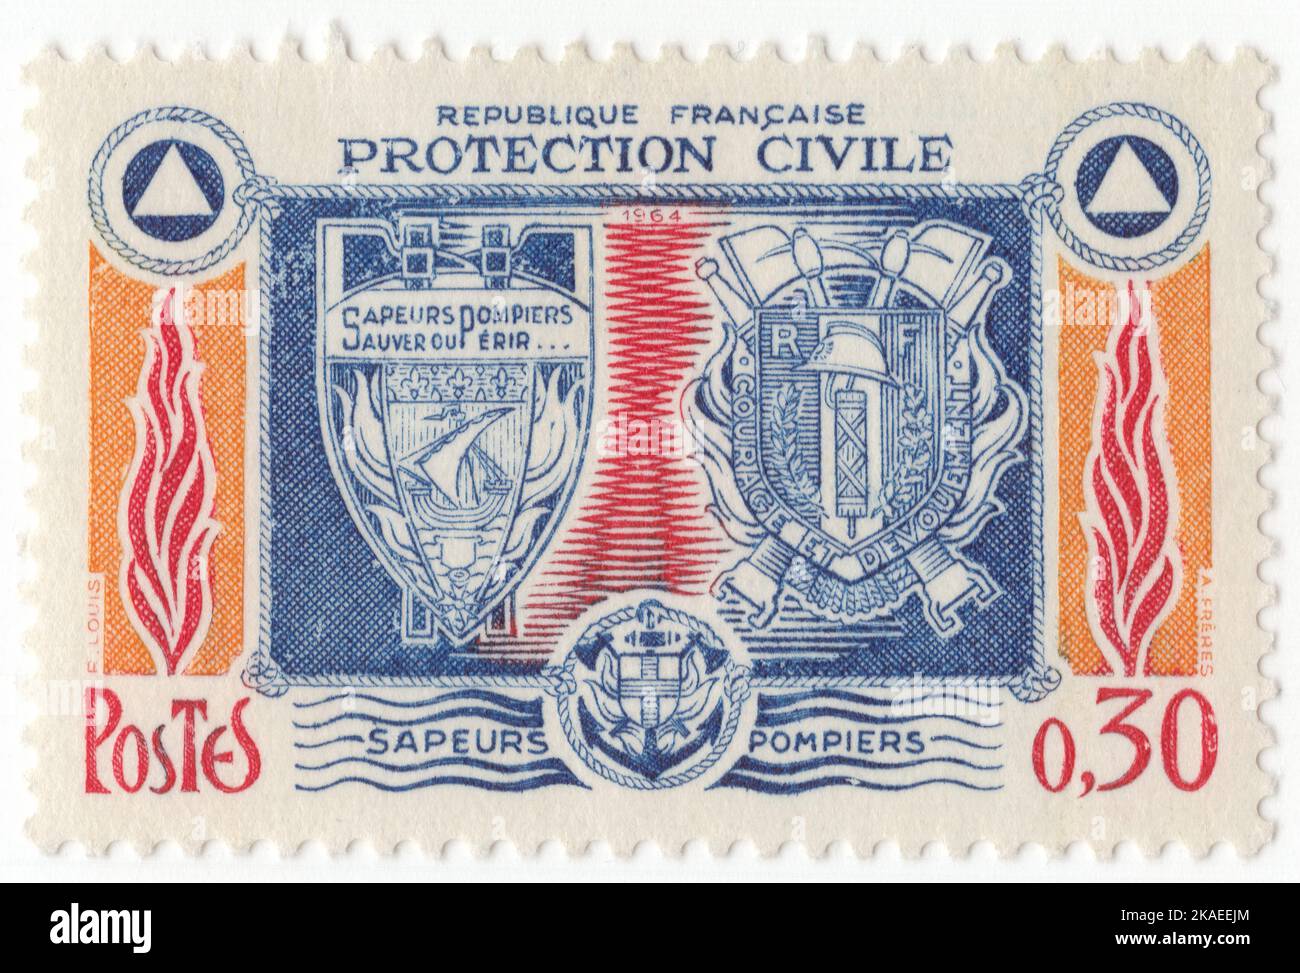 FRANCE - 1964 February 8: An 30 centimes blue, orange and red postage stamp depicting Fire Brigade Insignia, Symbols of Fire, Water and Civilian Defense. Issued to honor the fire brigades and civilian defense corps Stock Photo